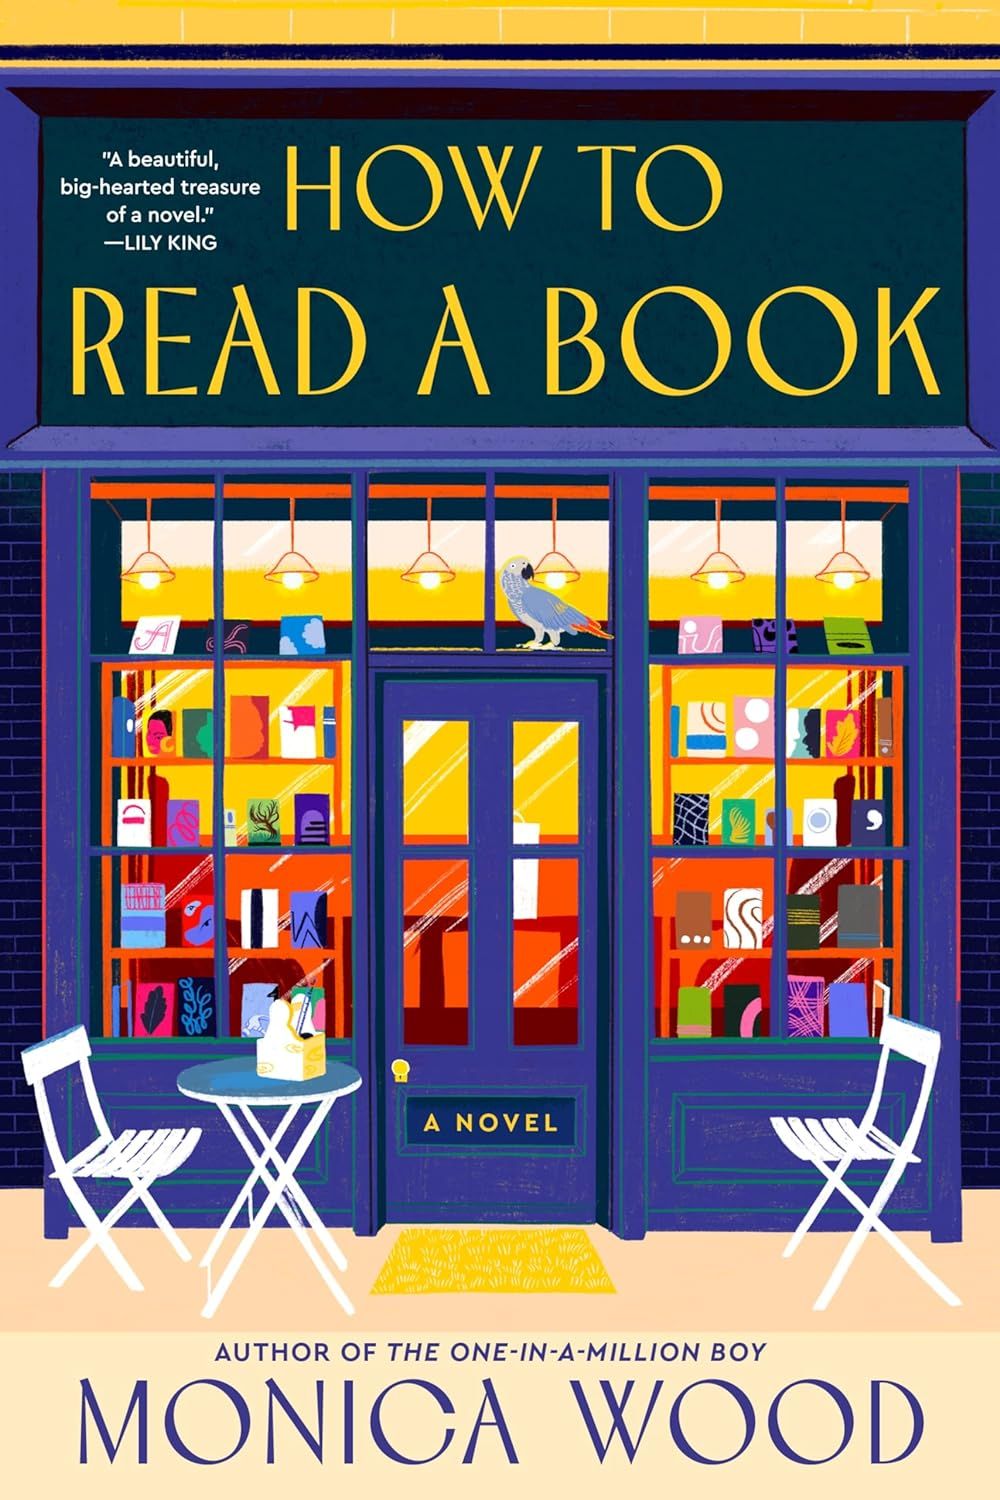 How to Read a Book by Monica Wood - book cover